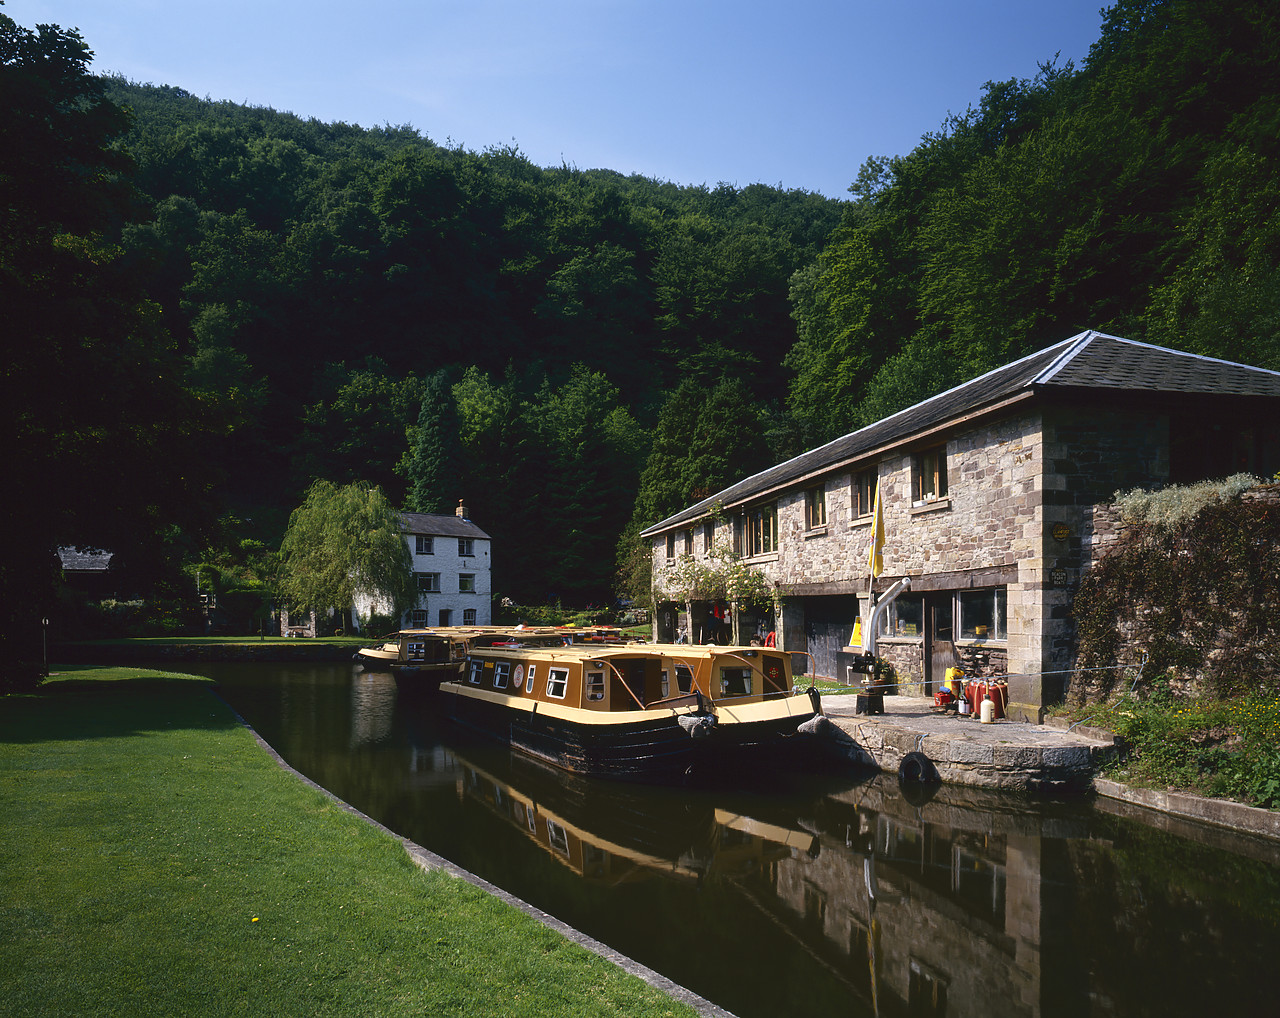 #944686-1 - Llanfoist Wharf, Monmouthshire & Brecon Canal, Gwent, Wales